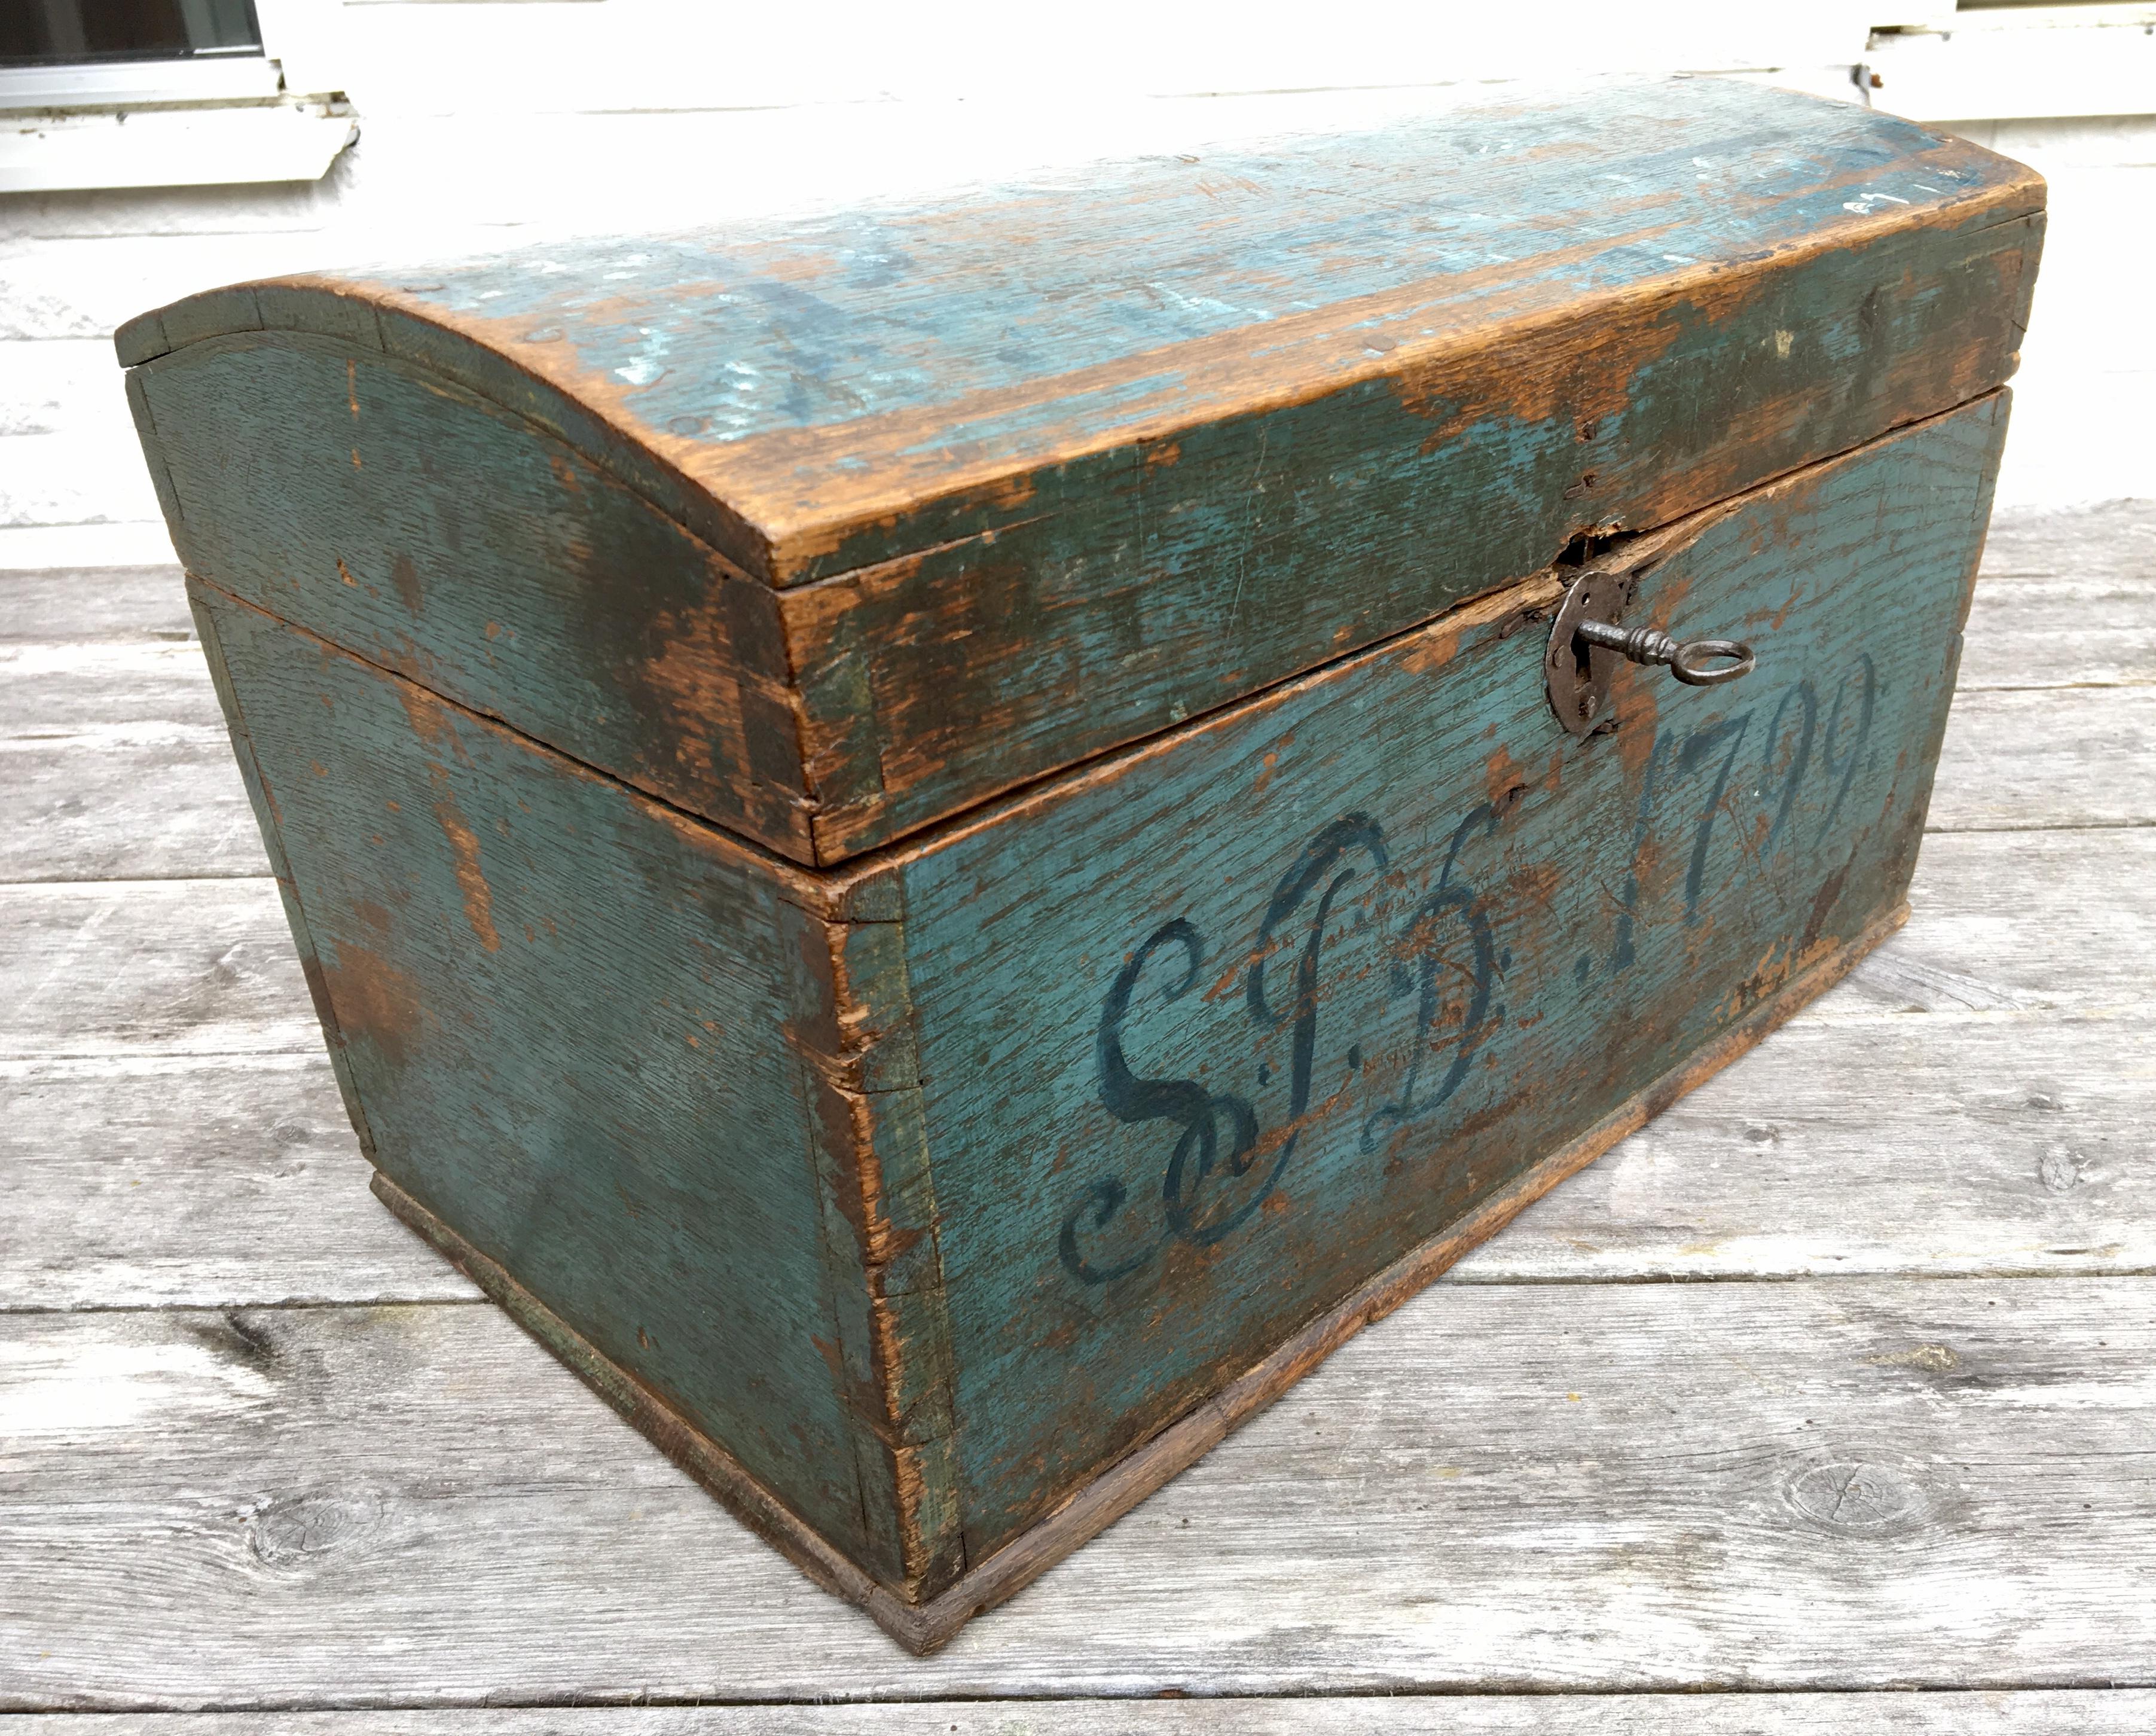 Swedish 18th century wooden monogrammed and dated Folk Art box, 1799.

An original painted box in blue color and Rococo rocaille painting decoration dated 1799 that has
belonged to a woman (the 